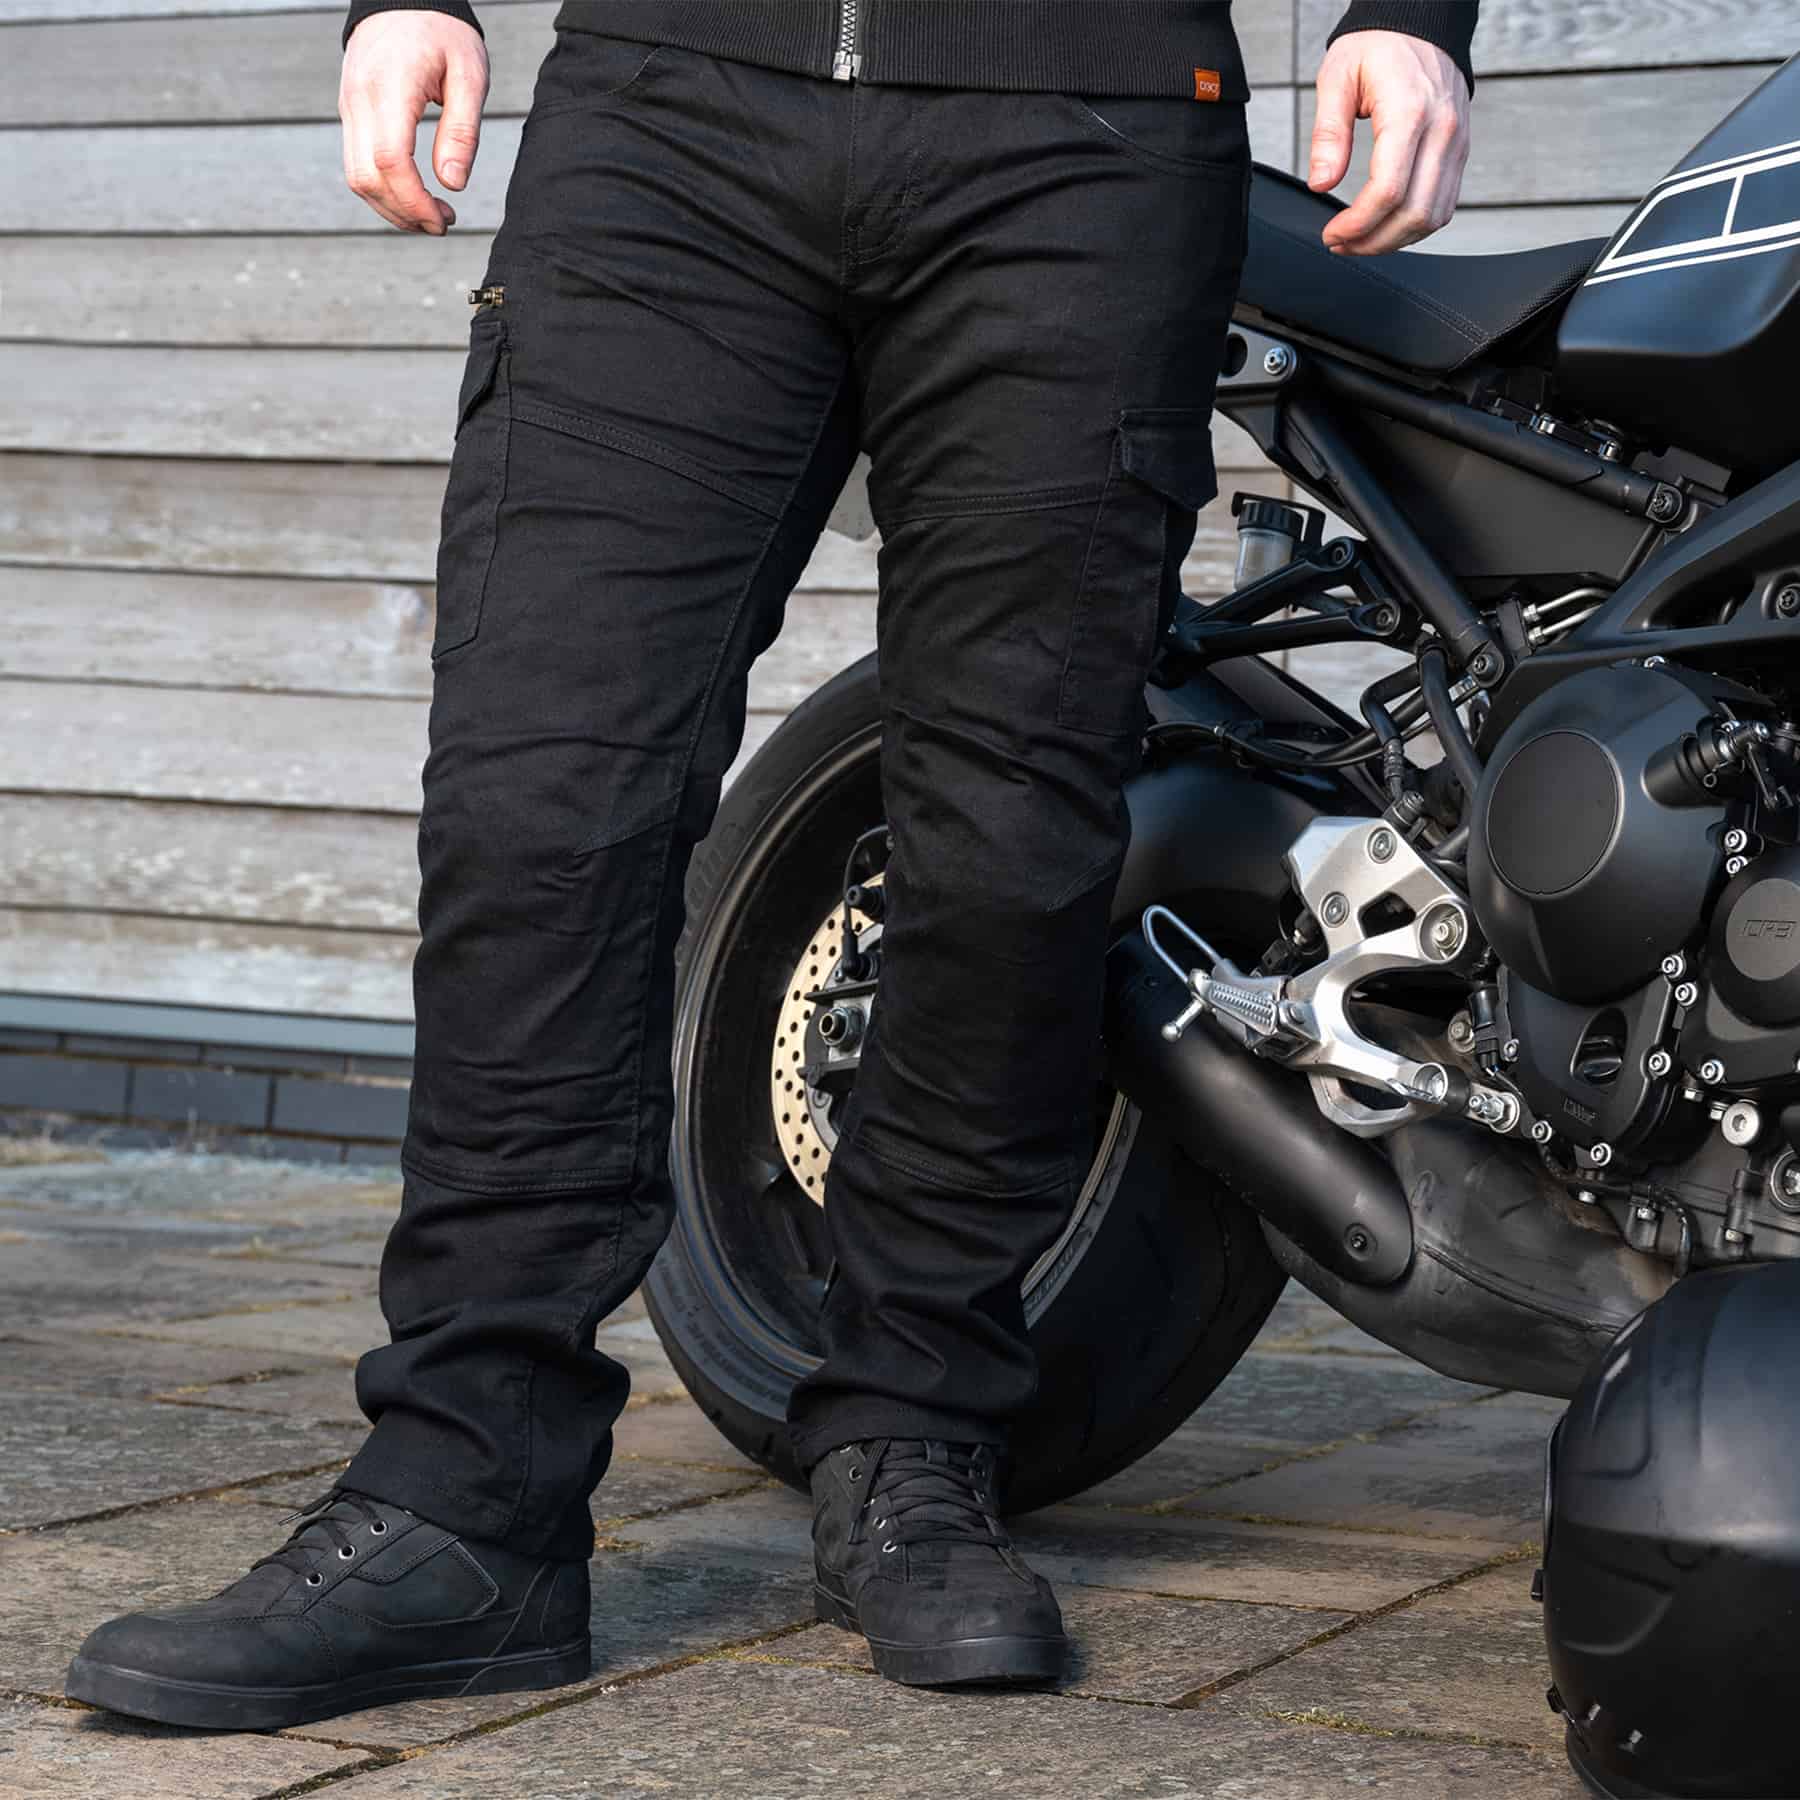 Route One Merlin Remy cargo protective motorcycle jean in black